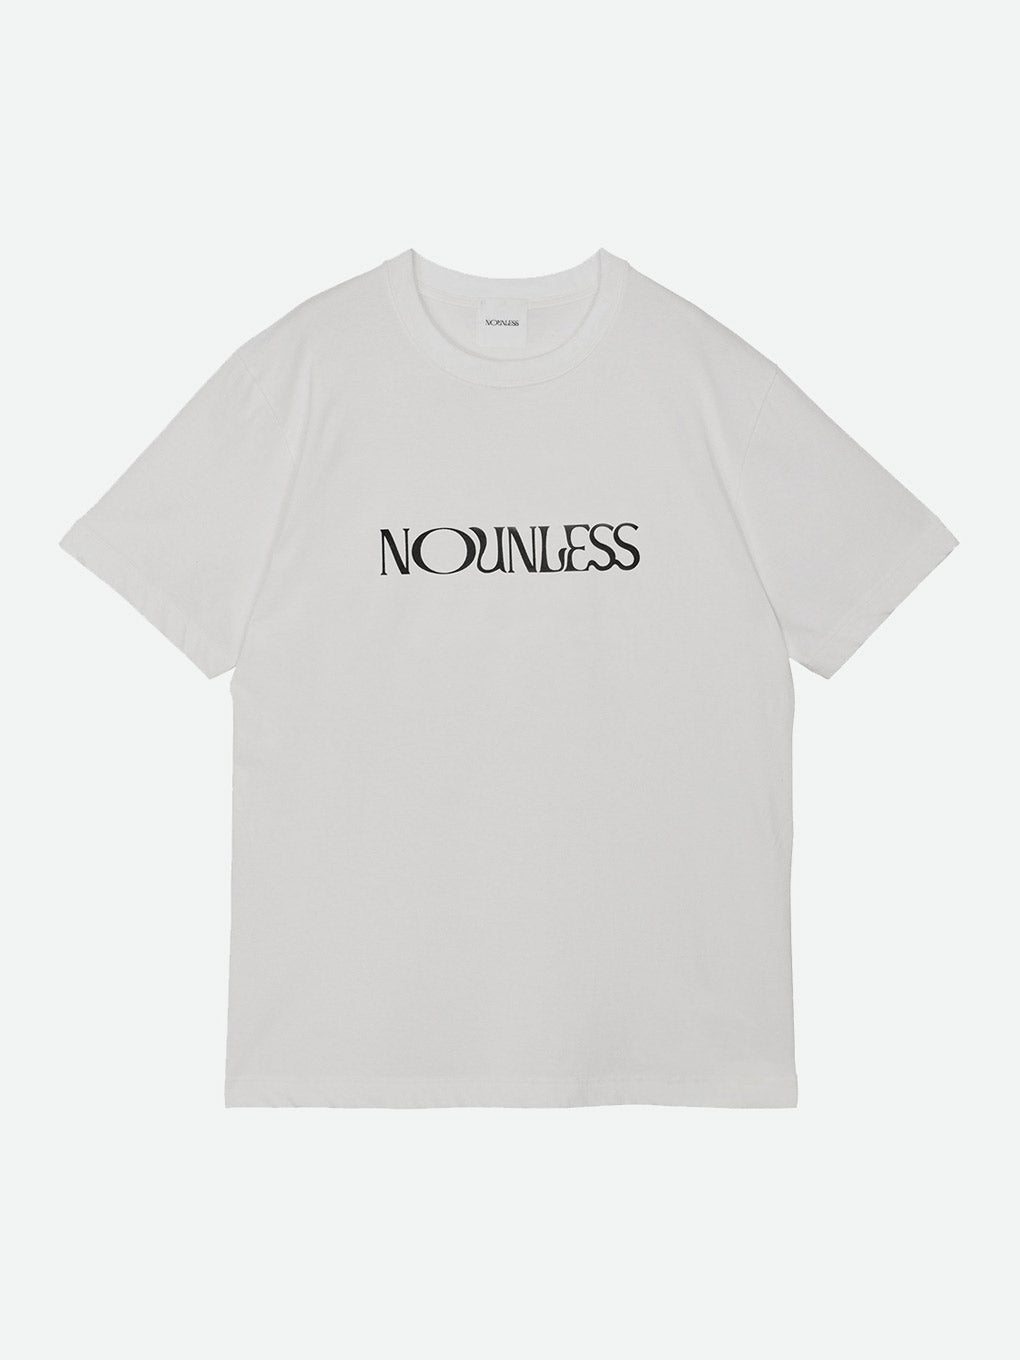 NOUNLESS BIG OVER TEE 2 - Tシャツ/カットソー(半袖/袖なし)